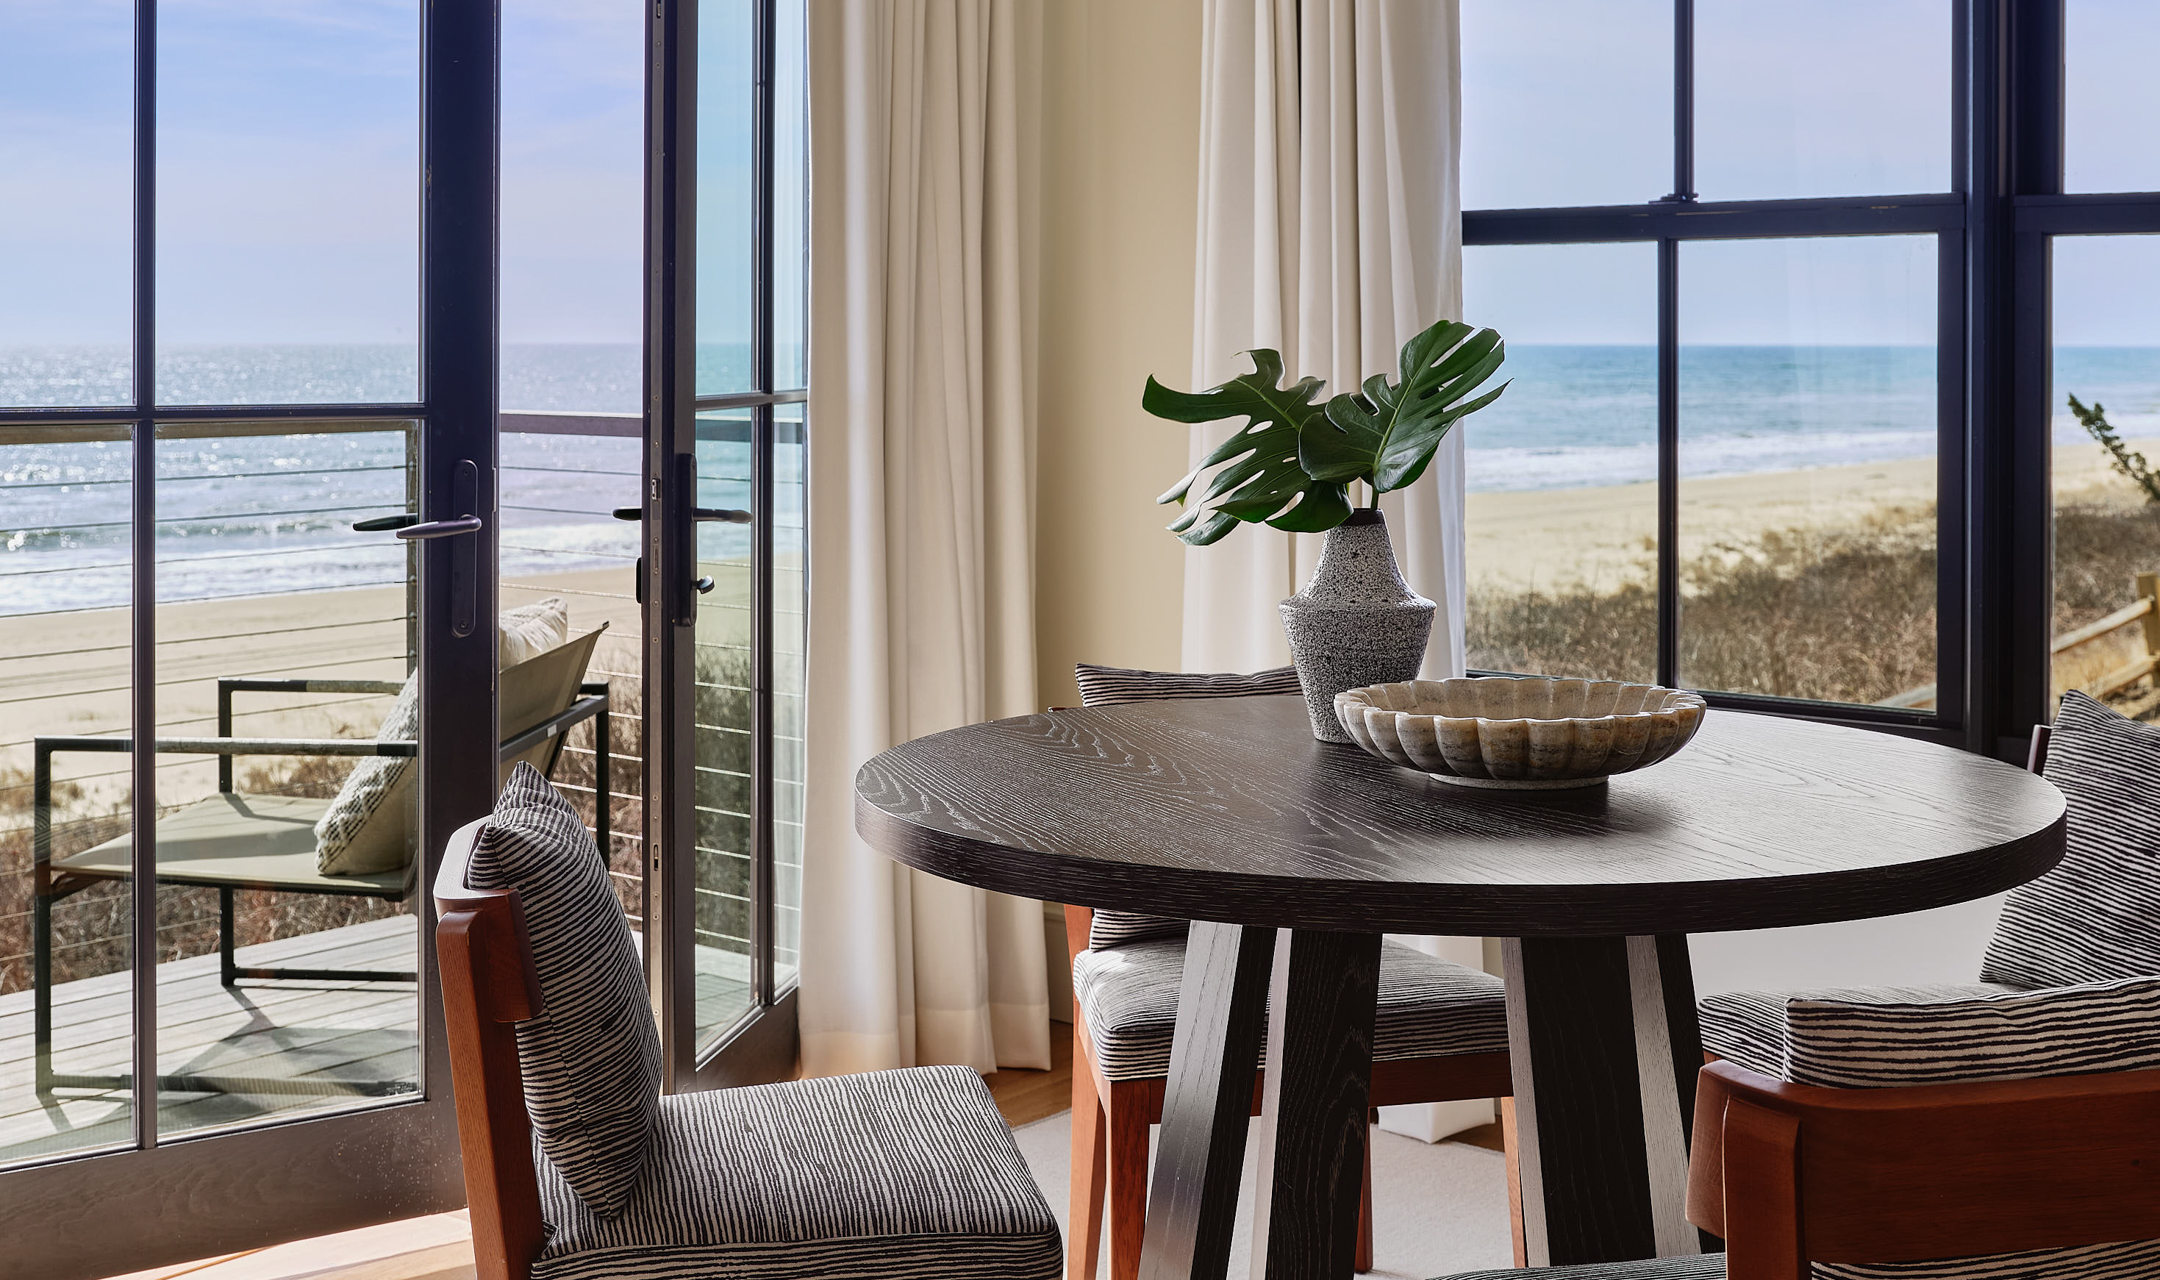 Table and chairs with beach view.